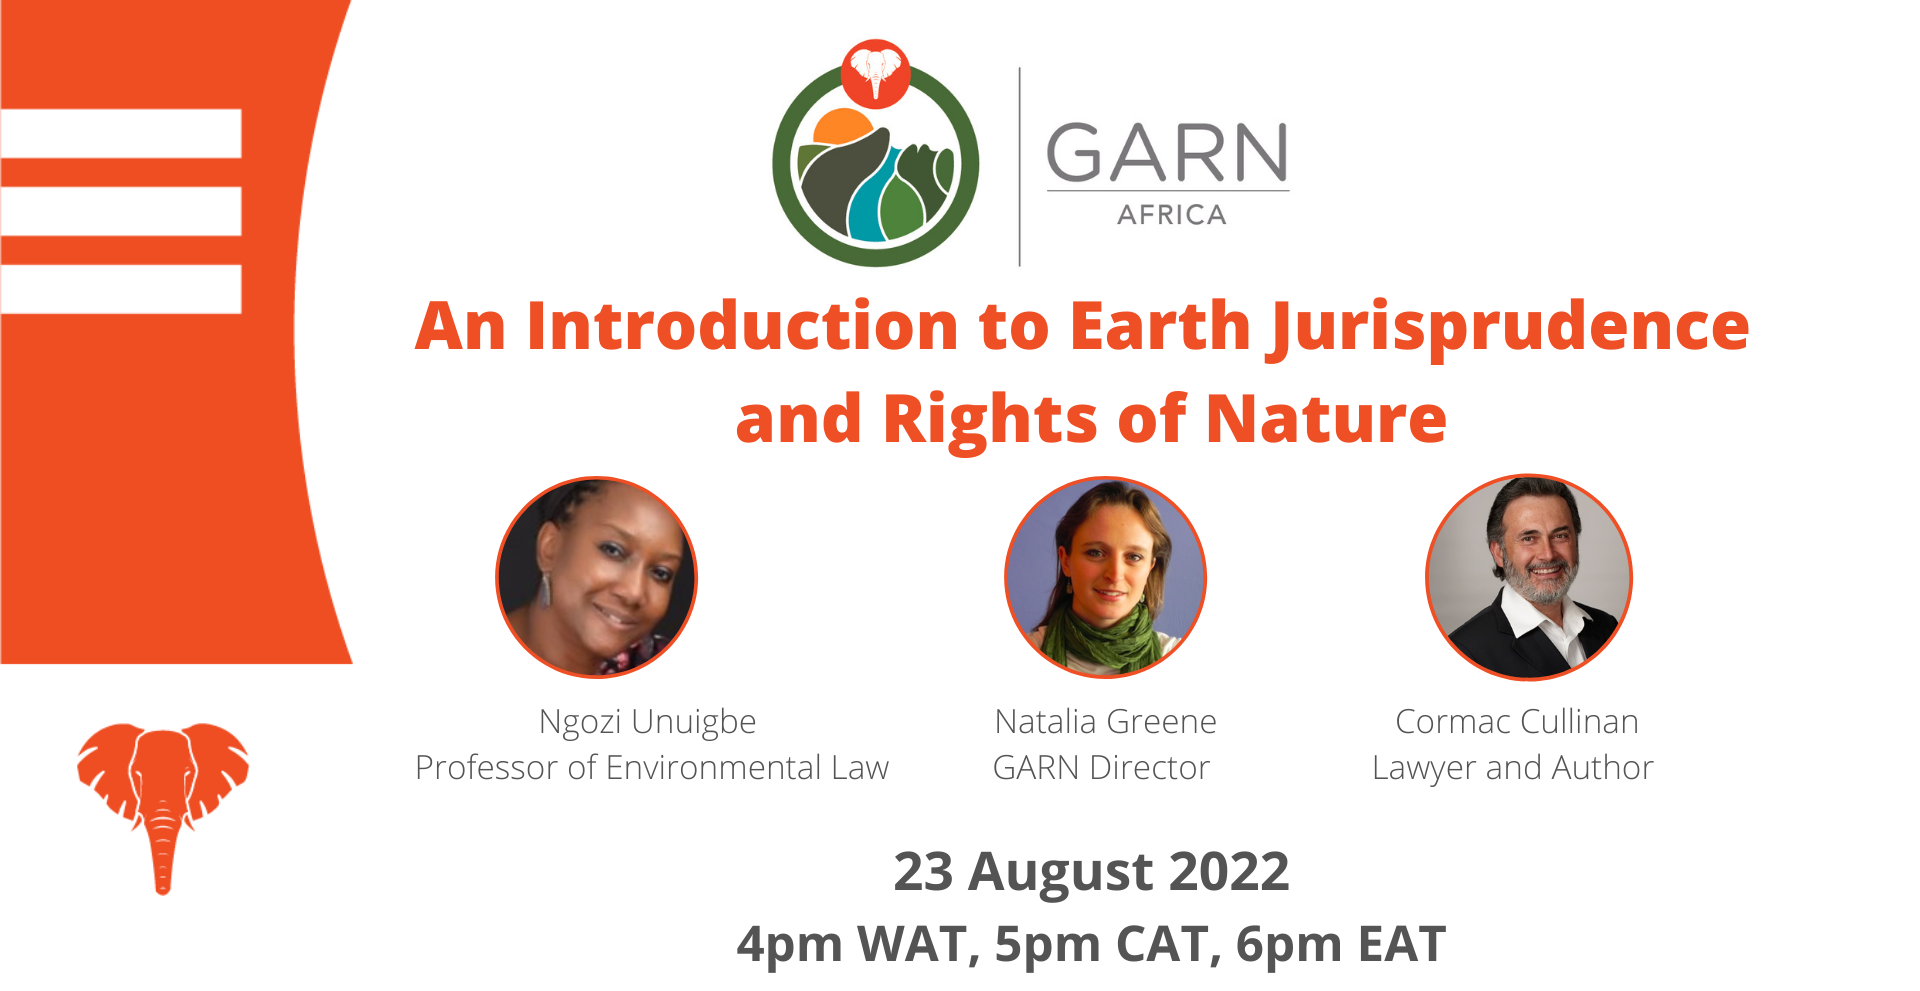 WEBINAR: An introduction to Rights of Nature and Earth Jurisprudence